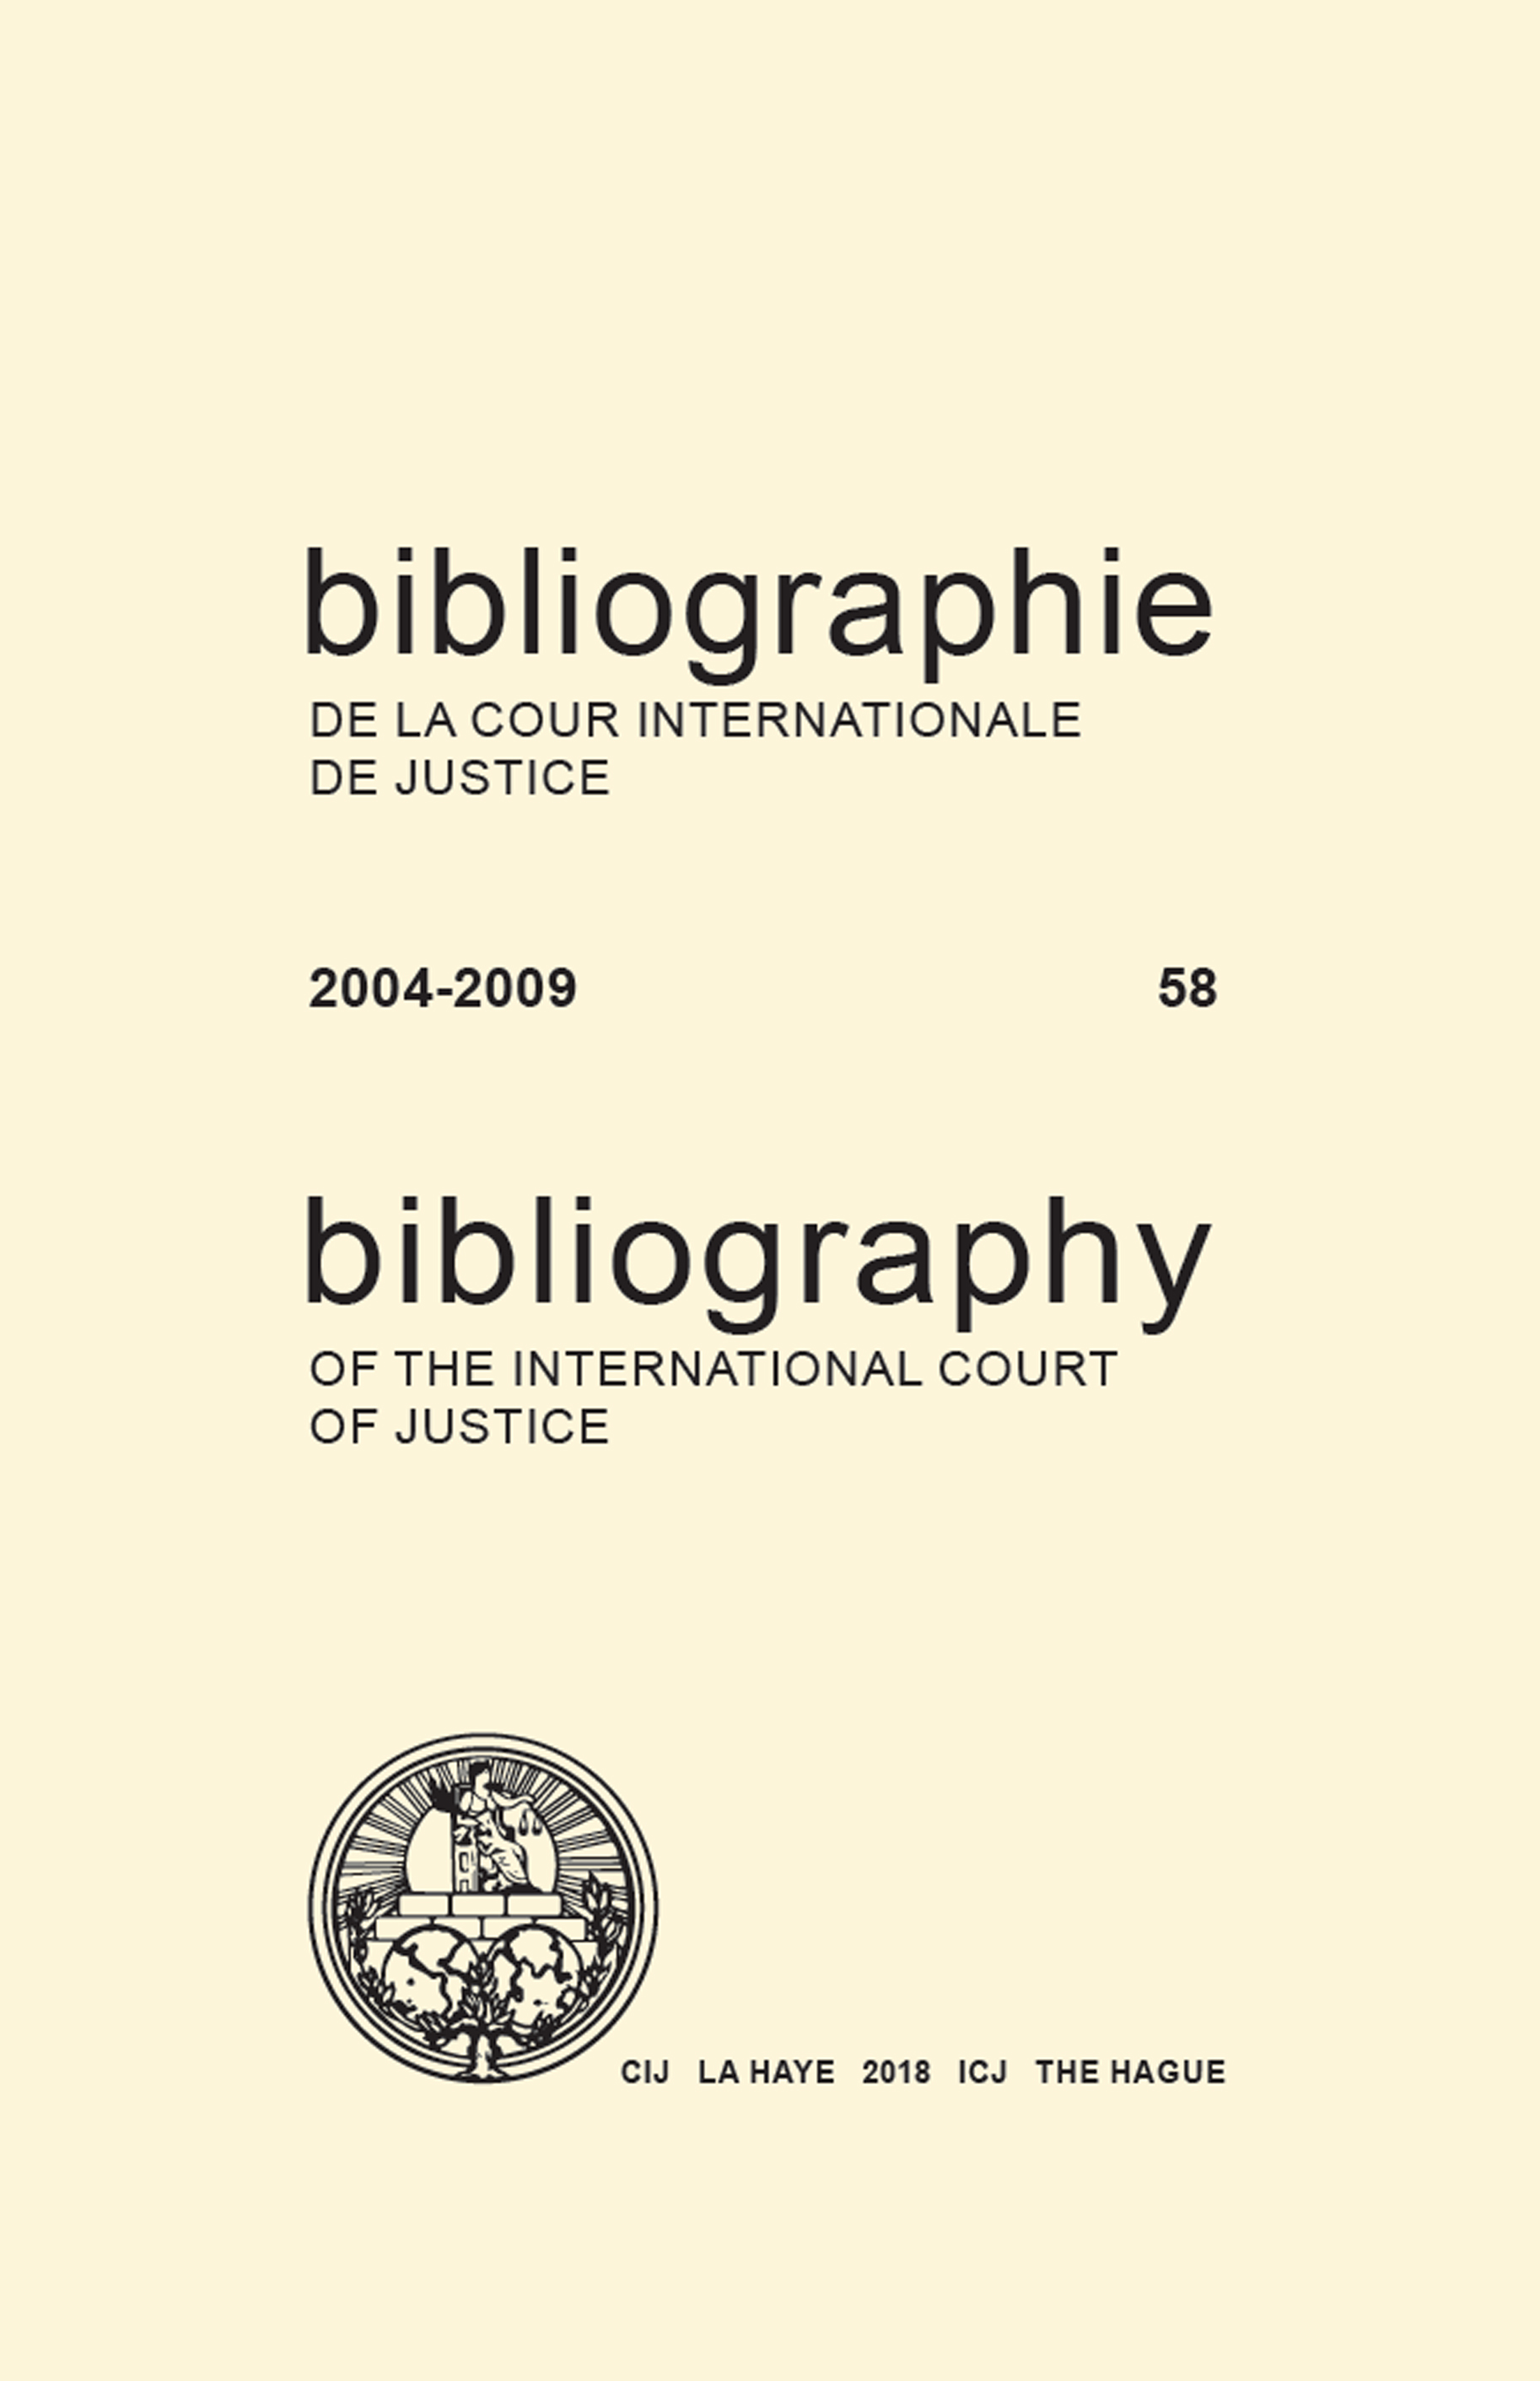 image of Bibliography of the International Court of Justice 2004-2009